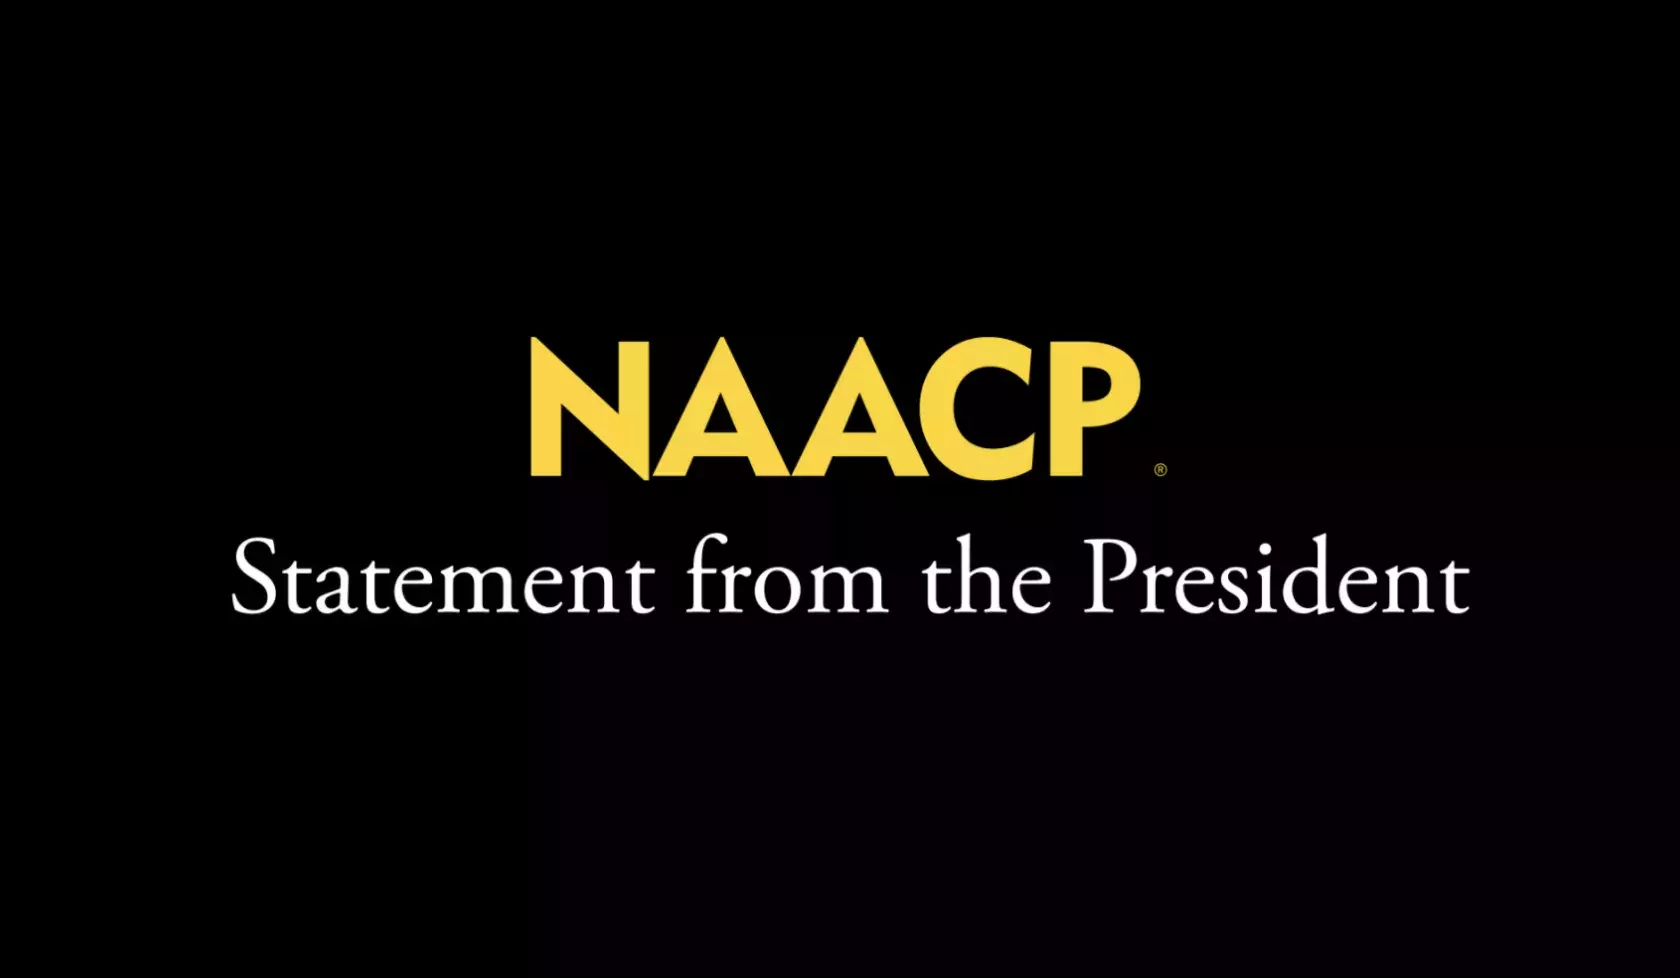 Statement from the President - NAACP